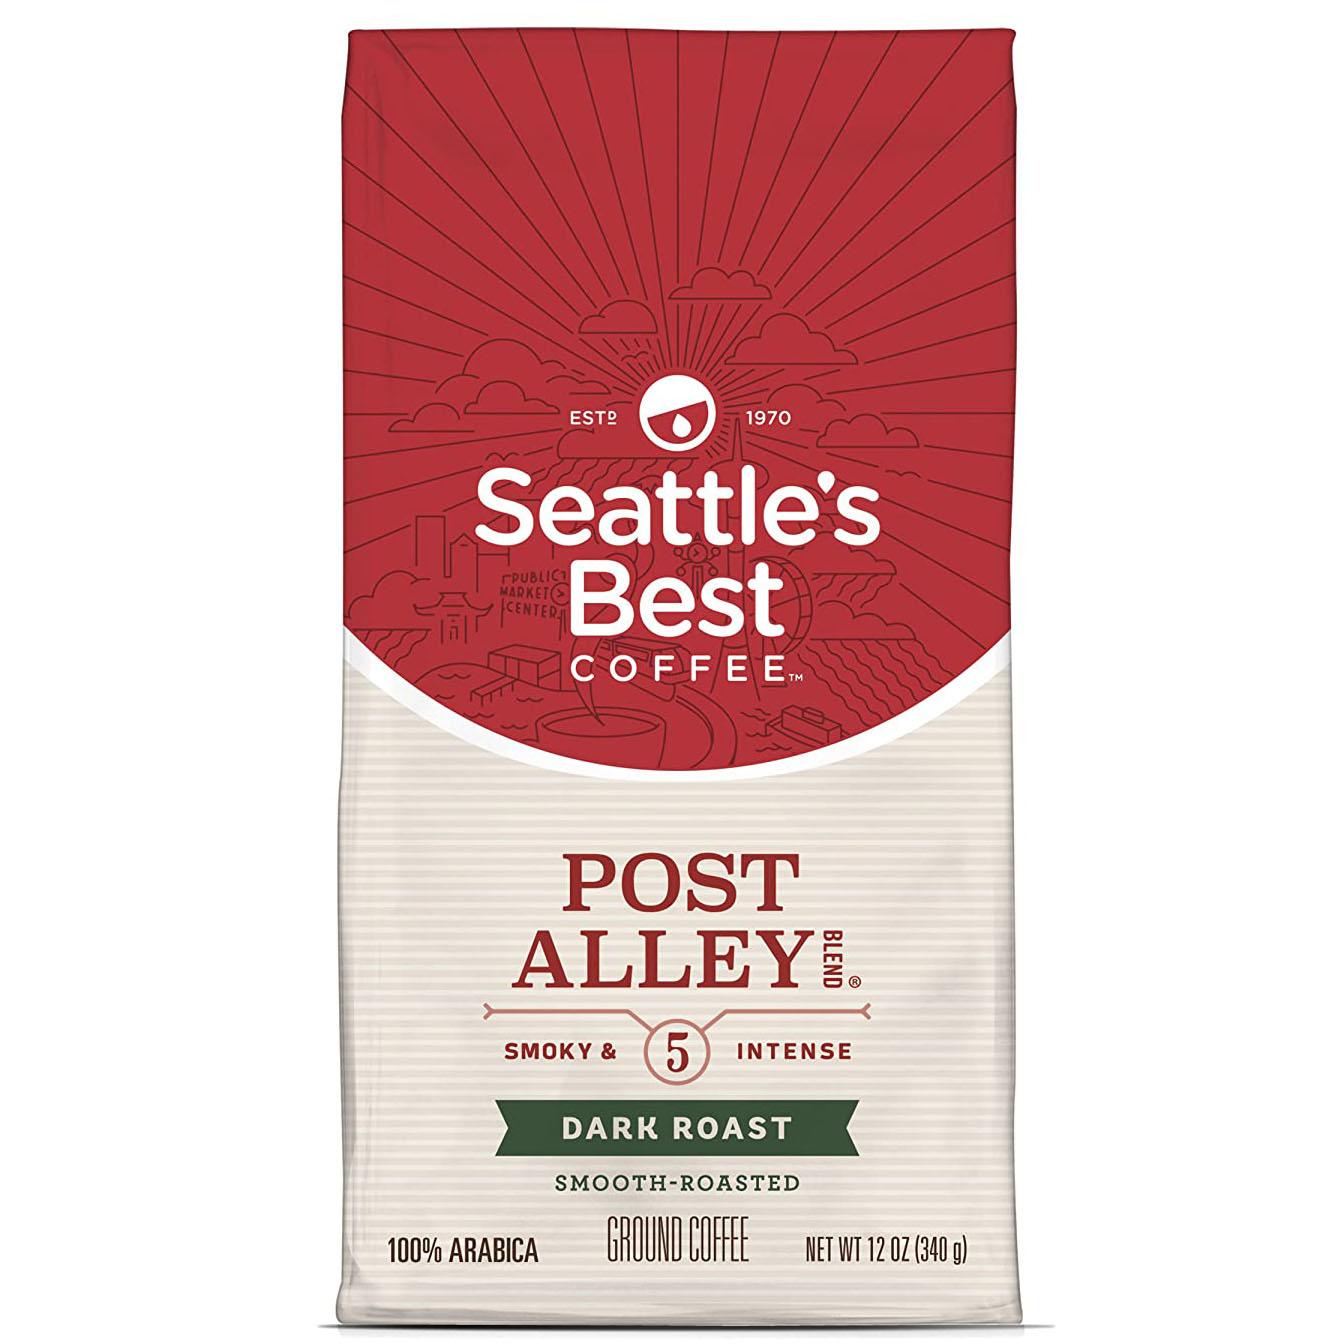 Seattles Best Coffee Post Alley Blend Ground Coffee for $6.27 Shipped